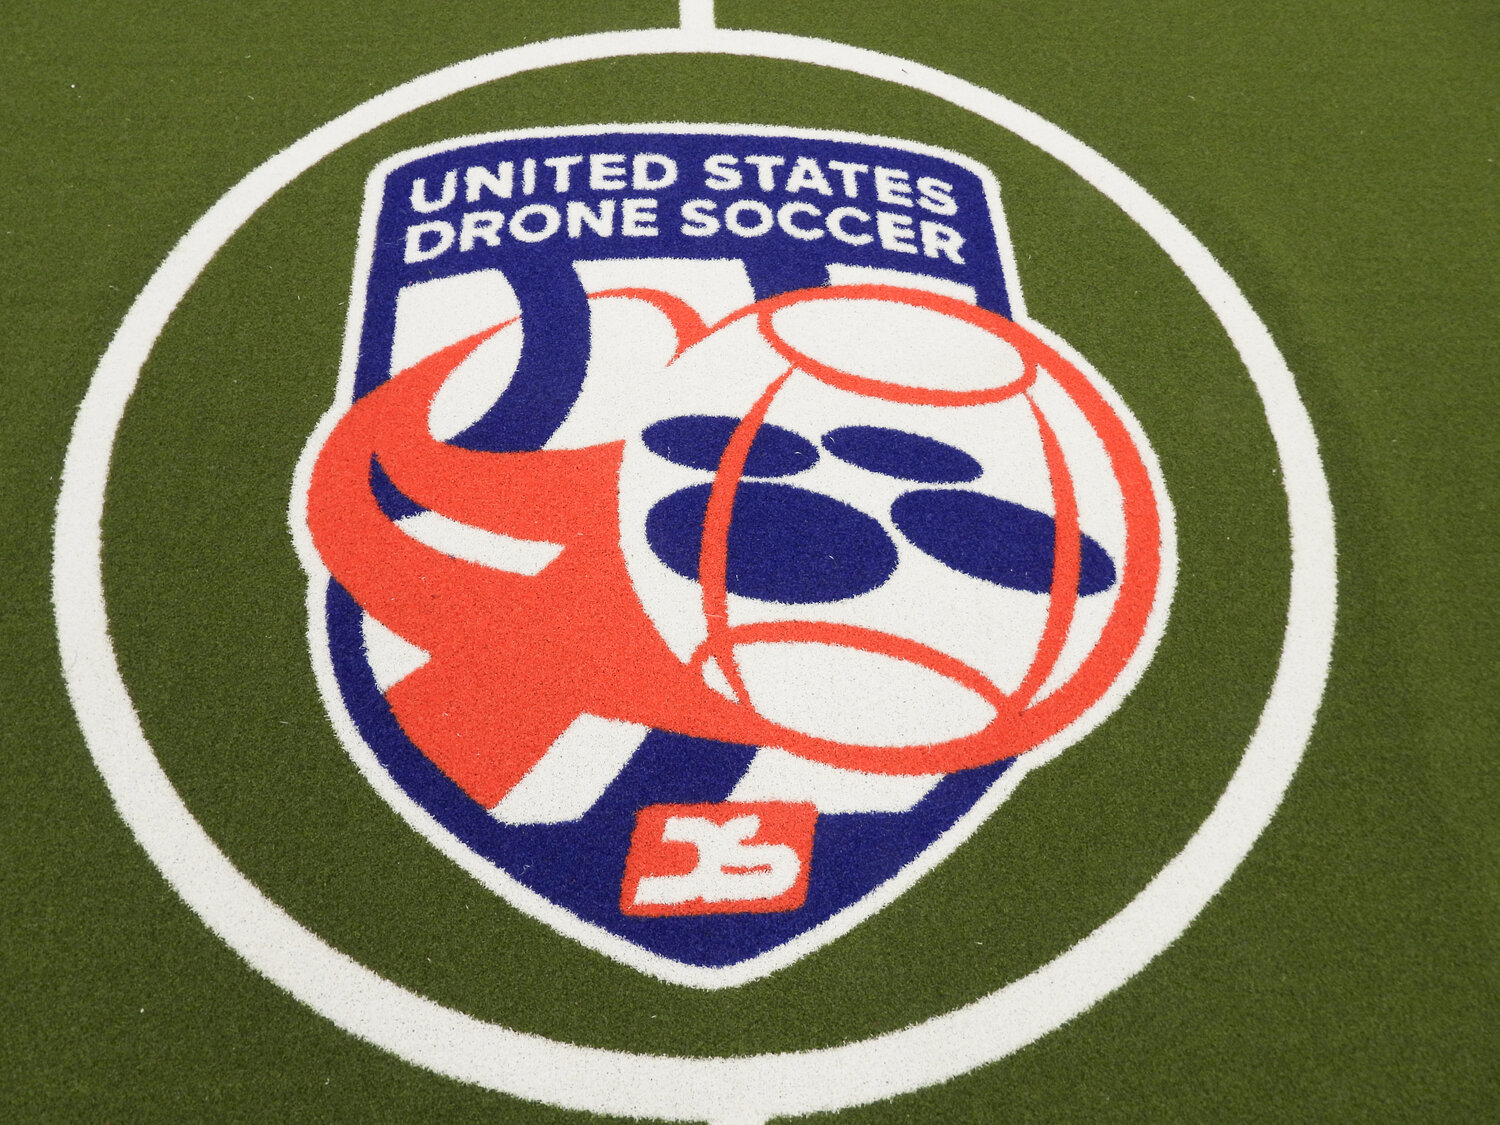 United States Drone Soccer is starting to take off across the nation